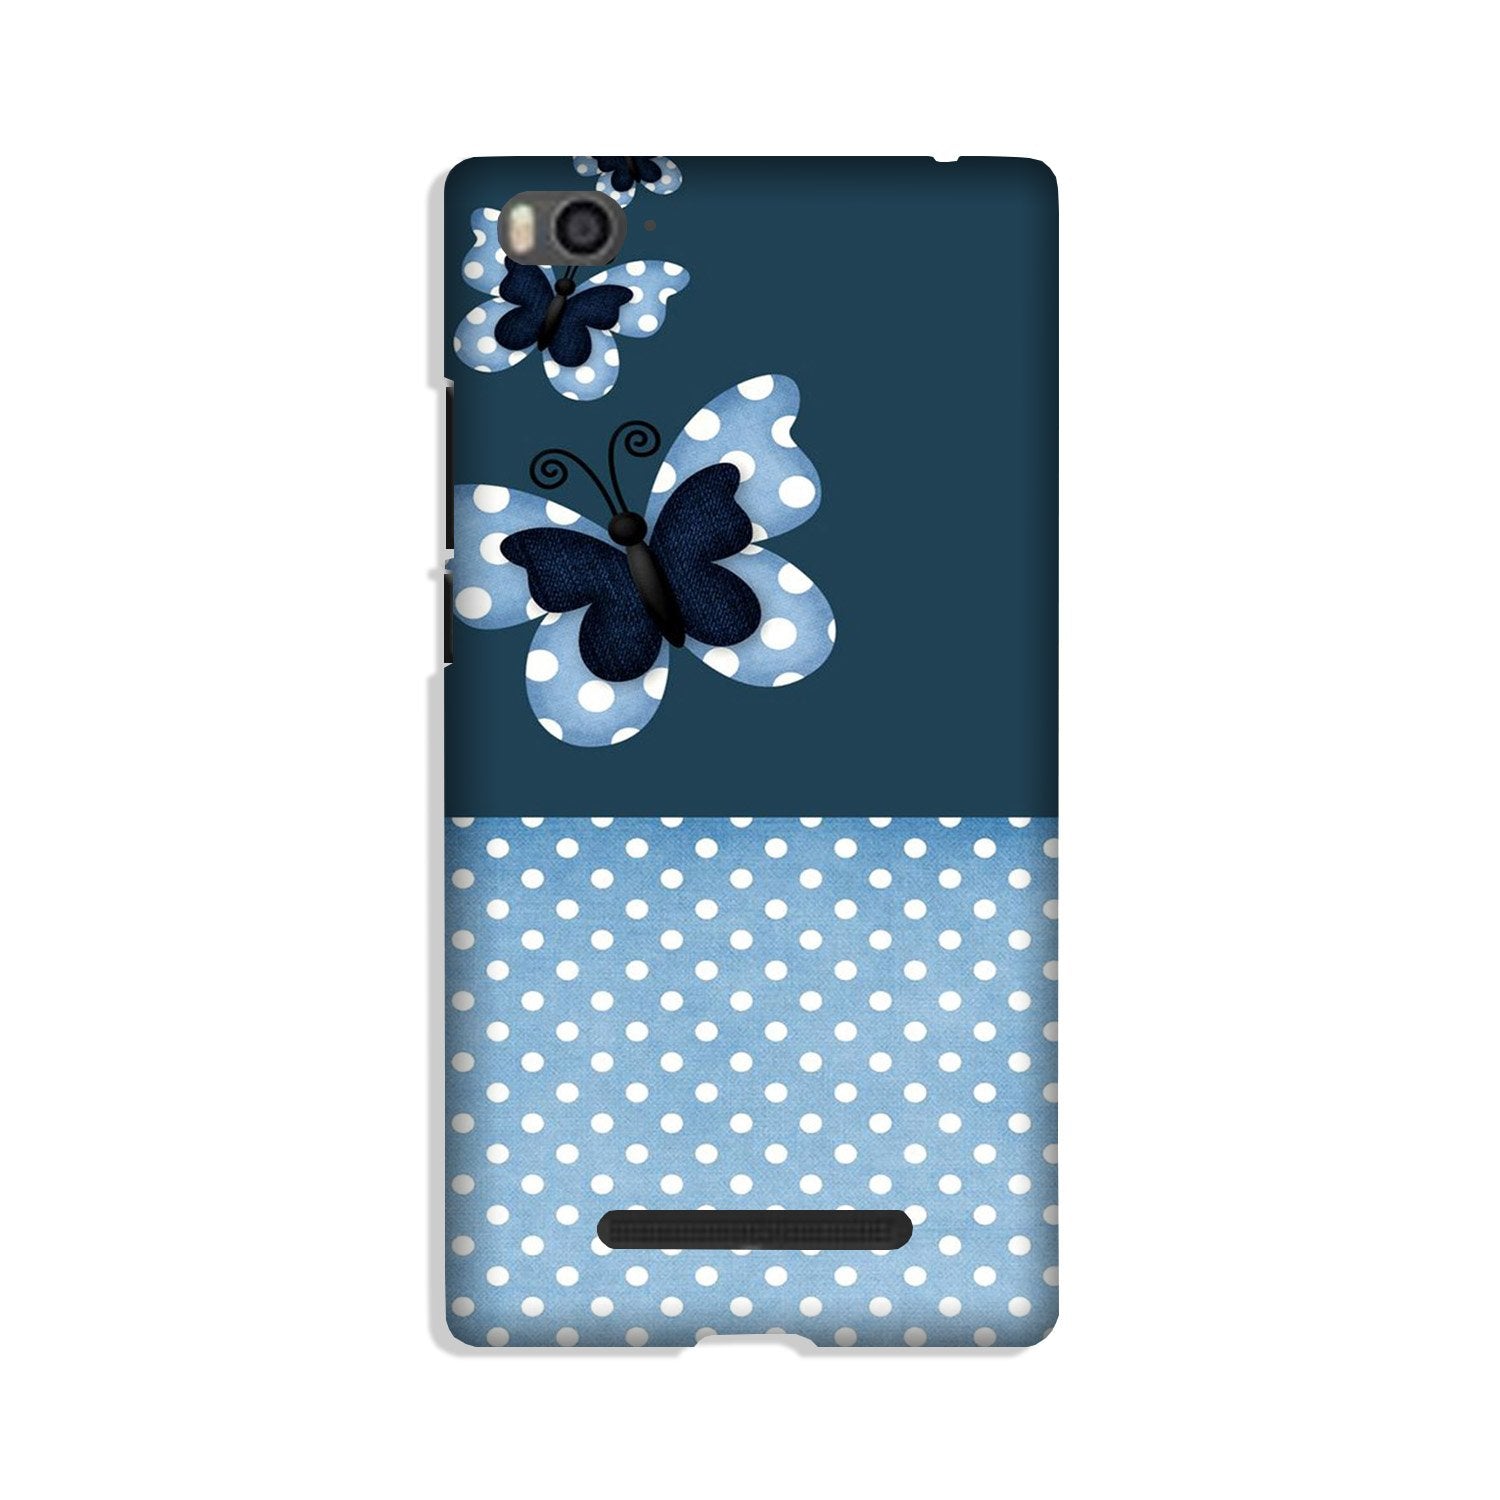 White dots Butterfly Case for Redmi 4A